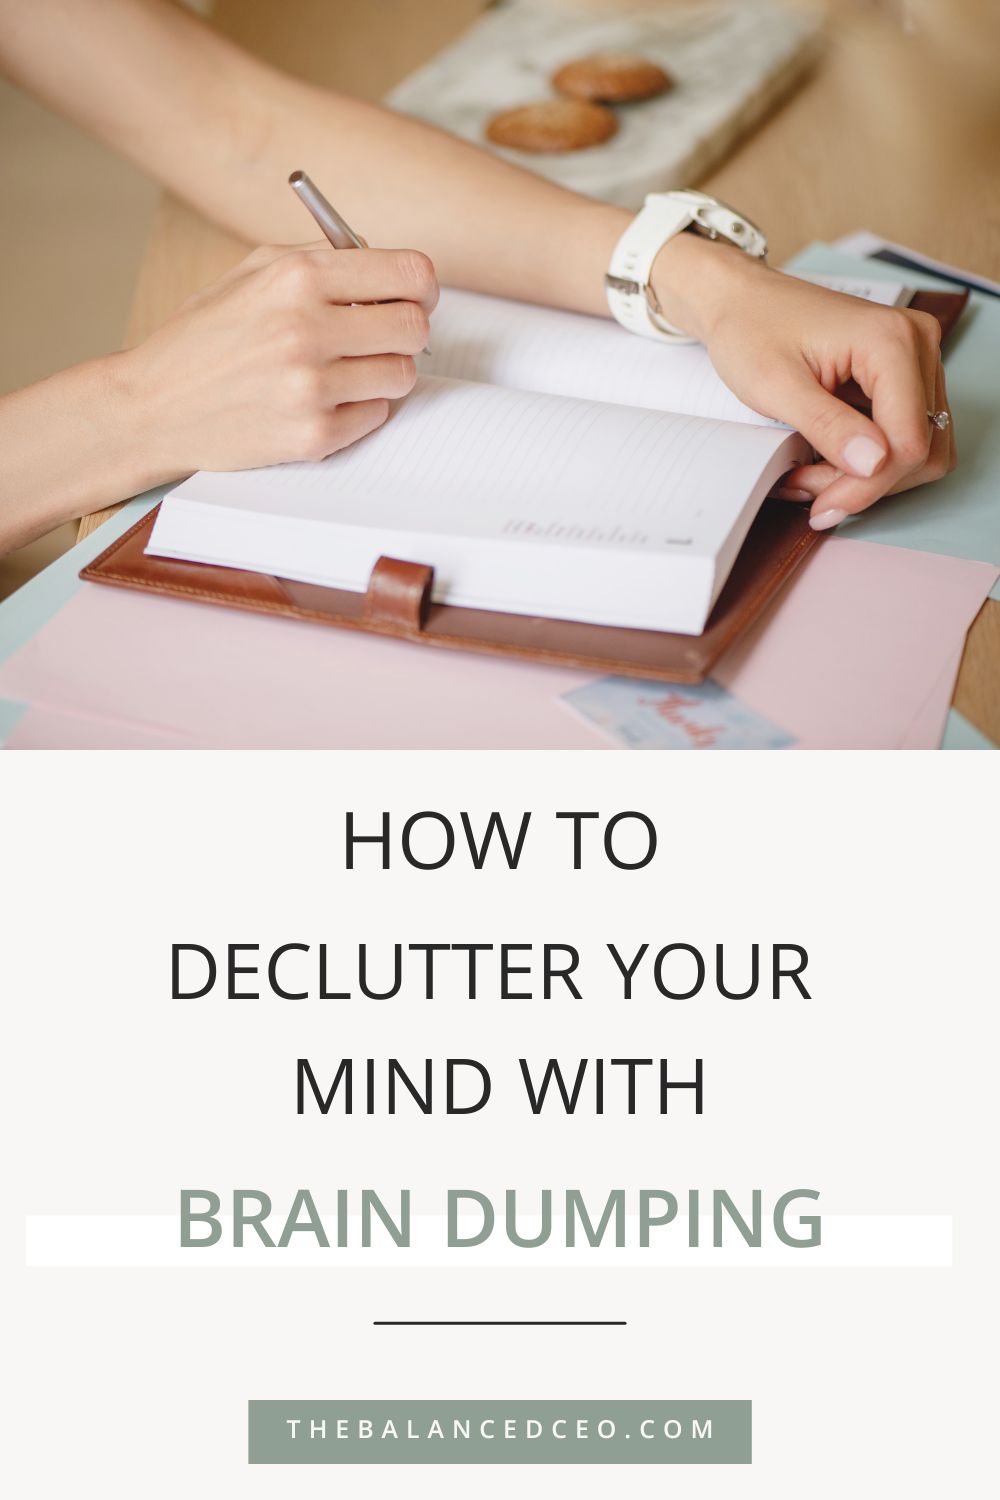 How to Declutter Your Mind with Brain Dumping